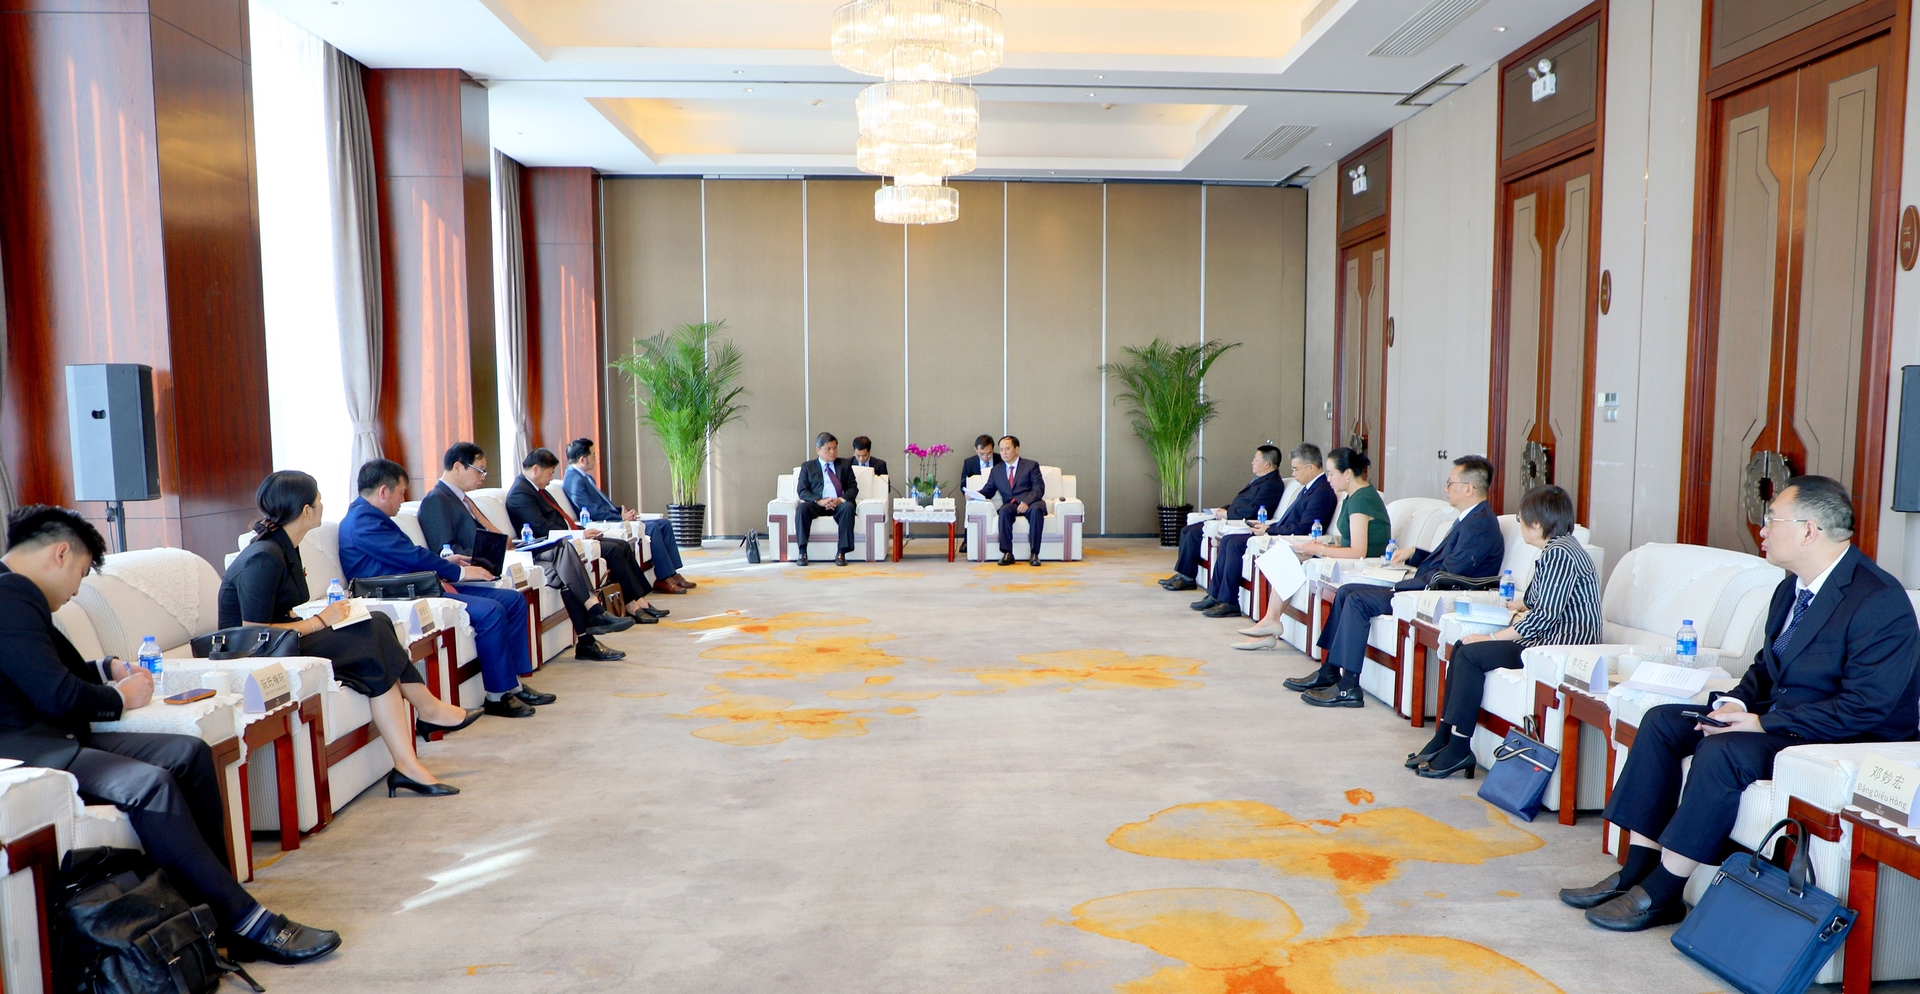 The working trip to Guangxi and Yunnan of the MARD delegation led by Deputy Minister Tran Thanh Nam achieved many positive results. Photo: Cao Tran.